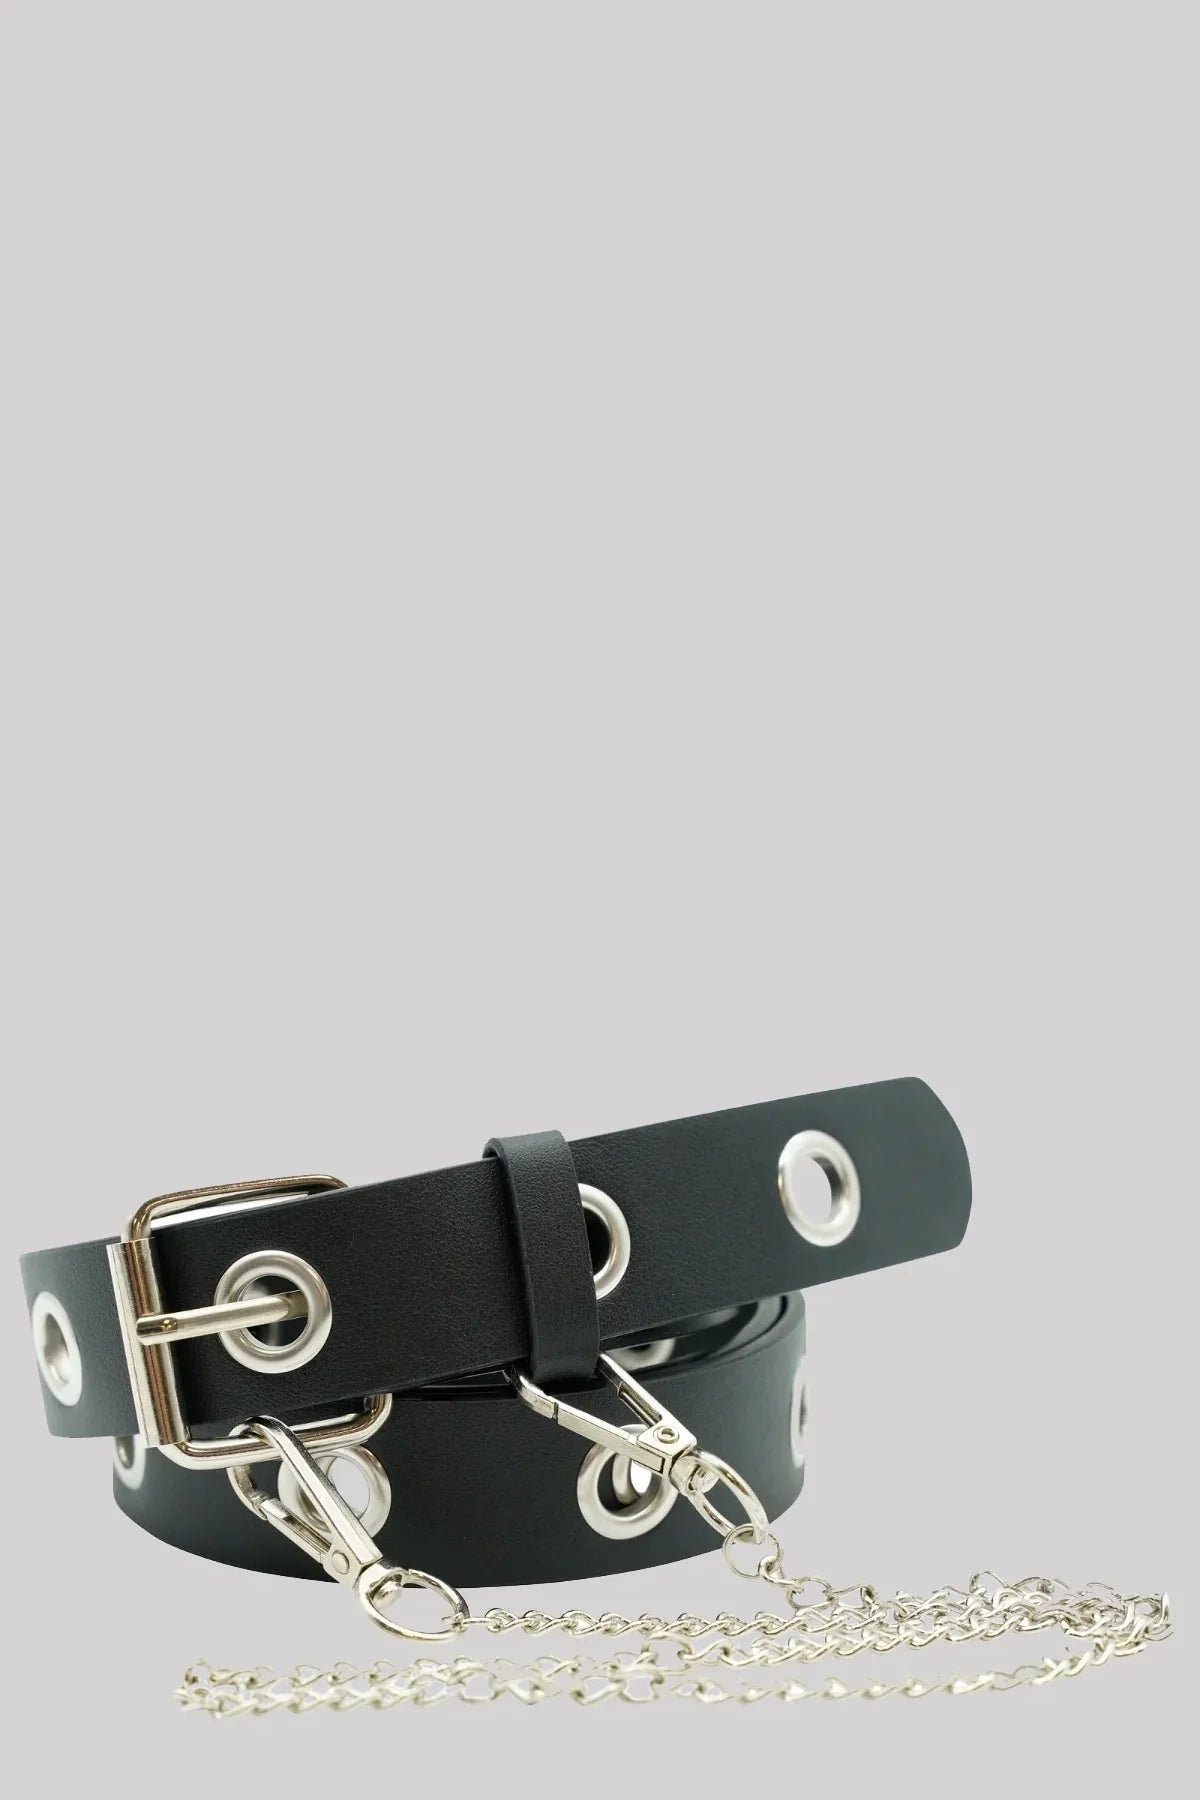 Ro Rox Hawk Large Eyelet Belt with Square Buckle & Chain